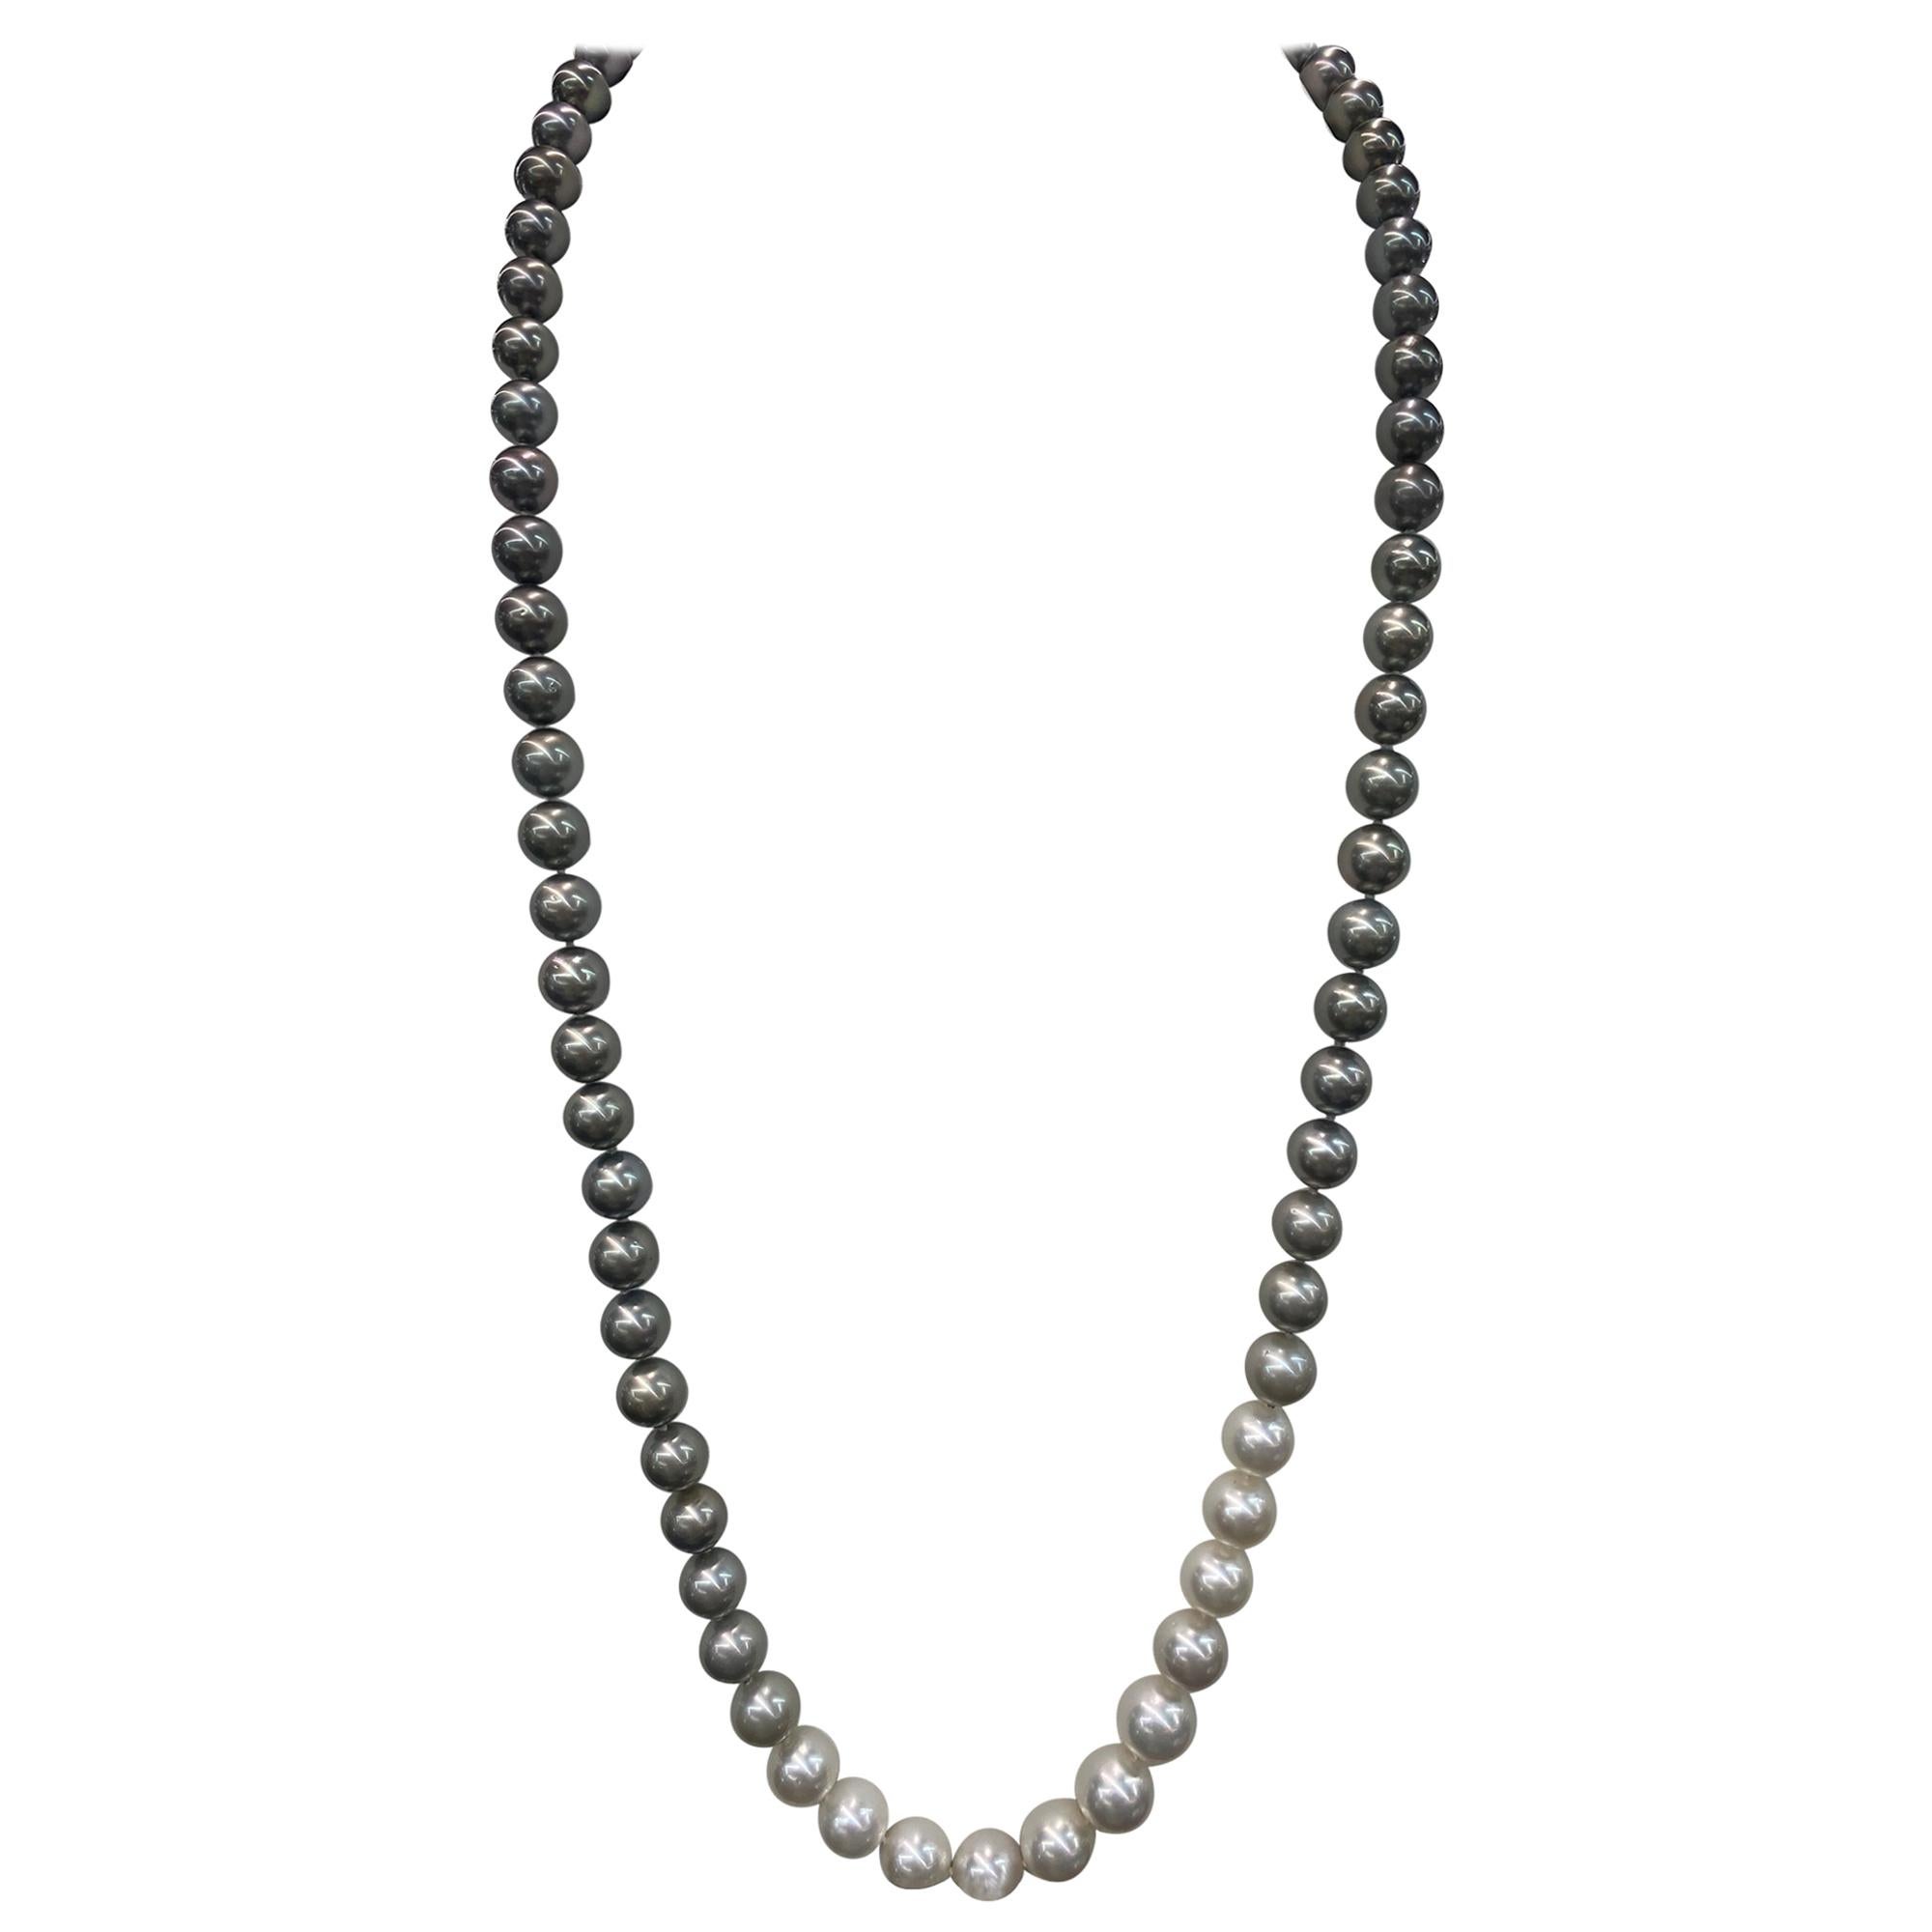 HARBOR D. Opera Ombre South Sea and Tahitian Pearl Necklace Diamond Clasp